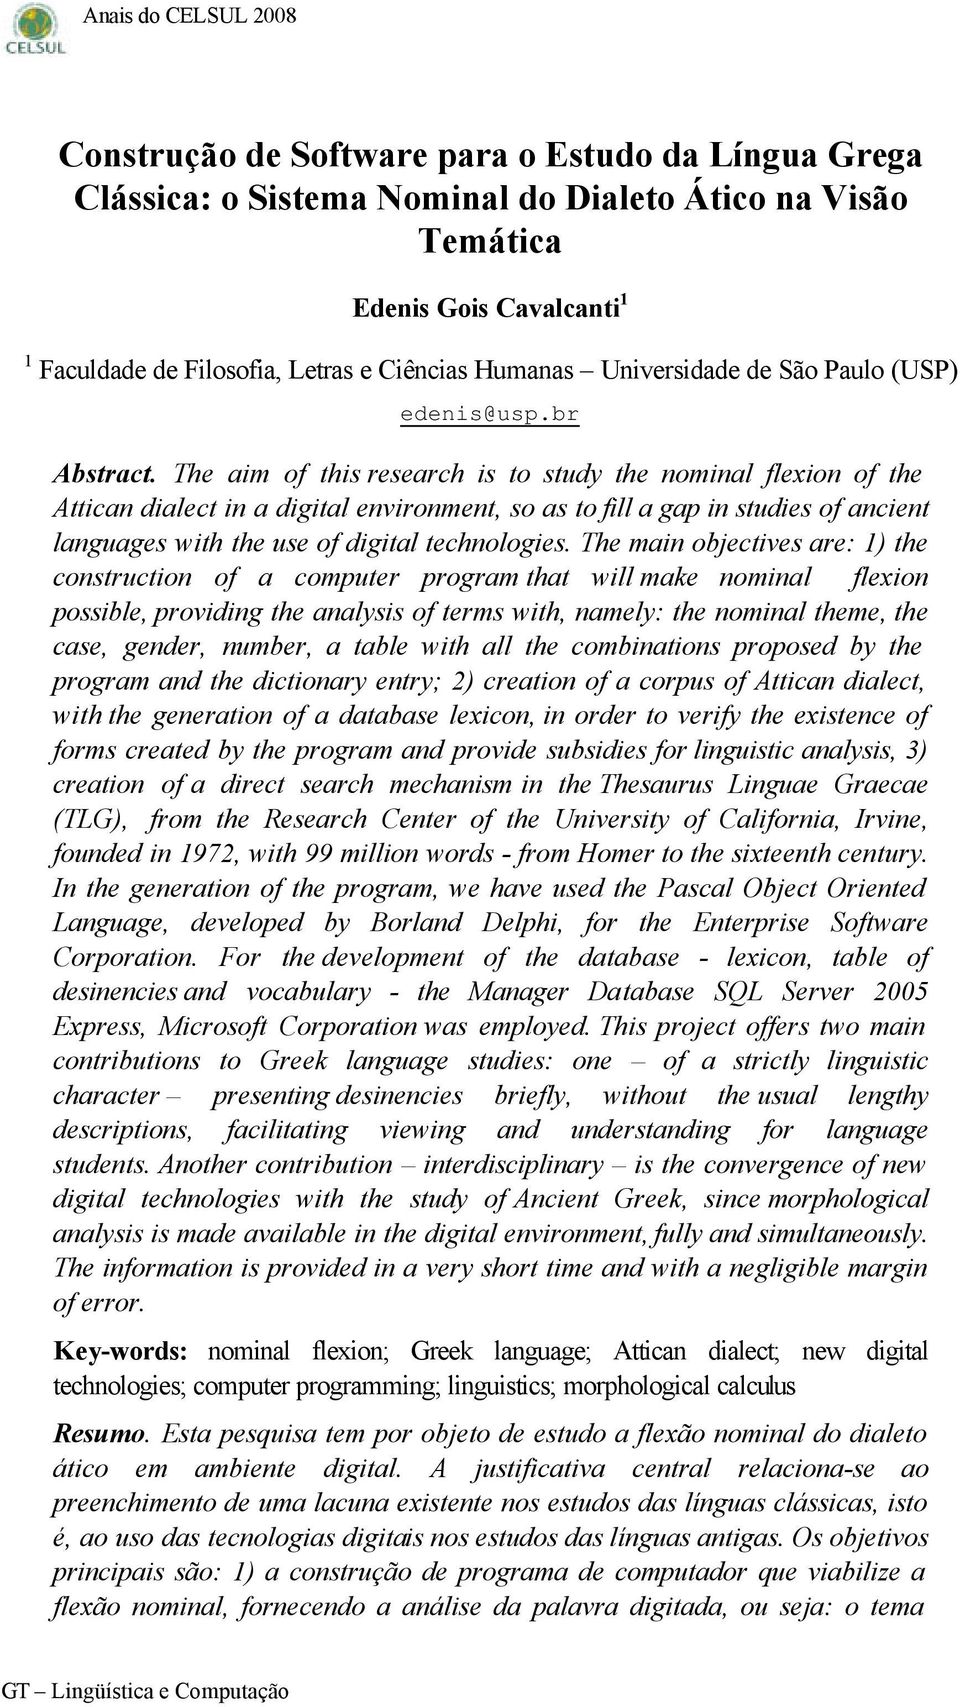 The aim of this research is to study the nominal flexion of the Attican dialect in a digital environment, so as to fill a gap in studies of ancient languages with the use of digital technologies.